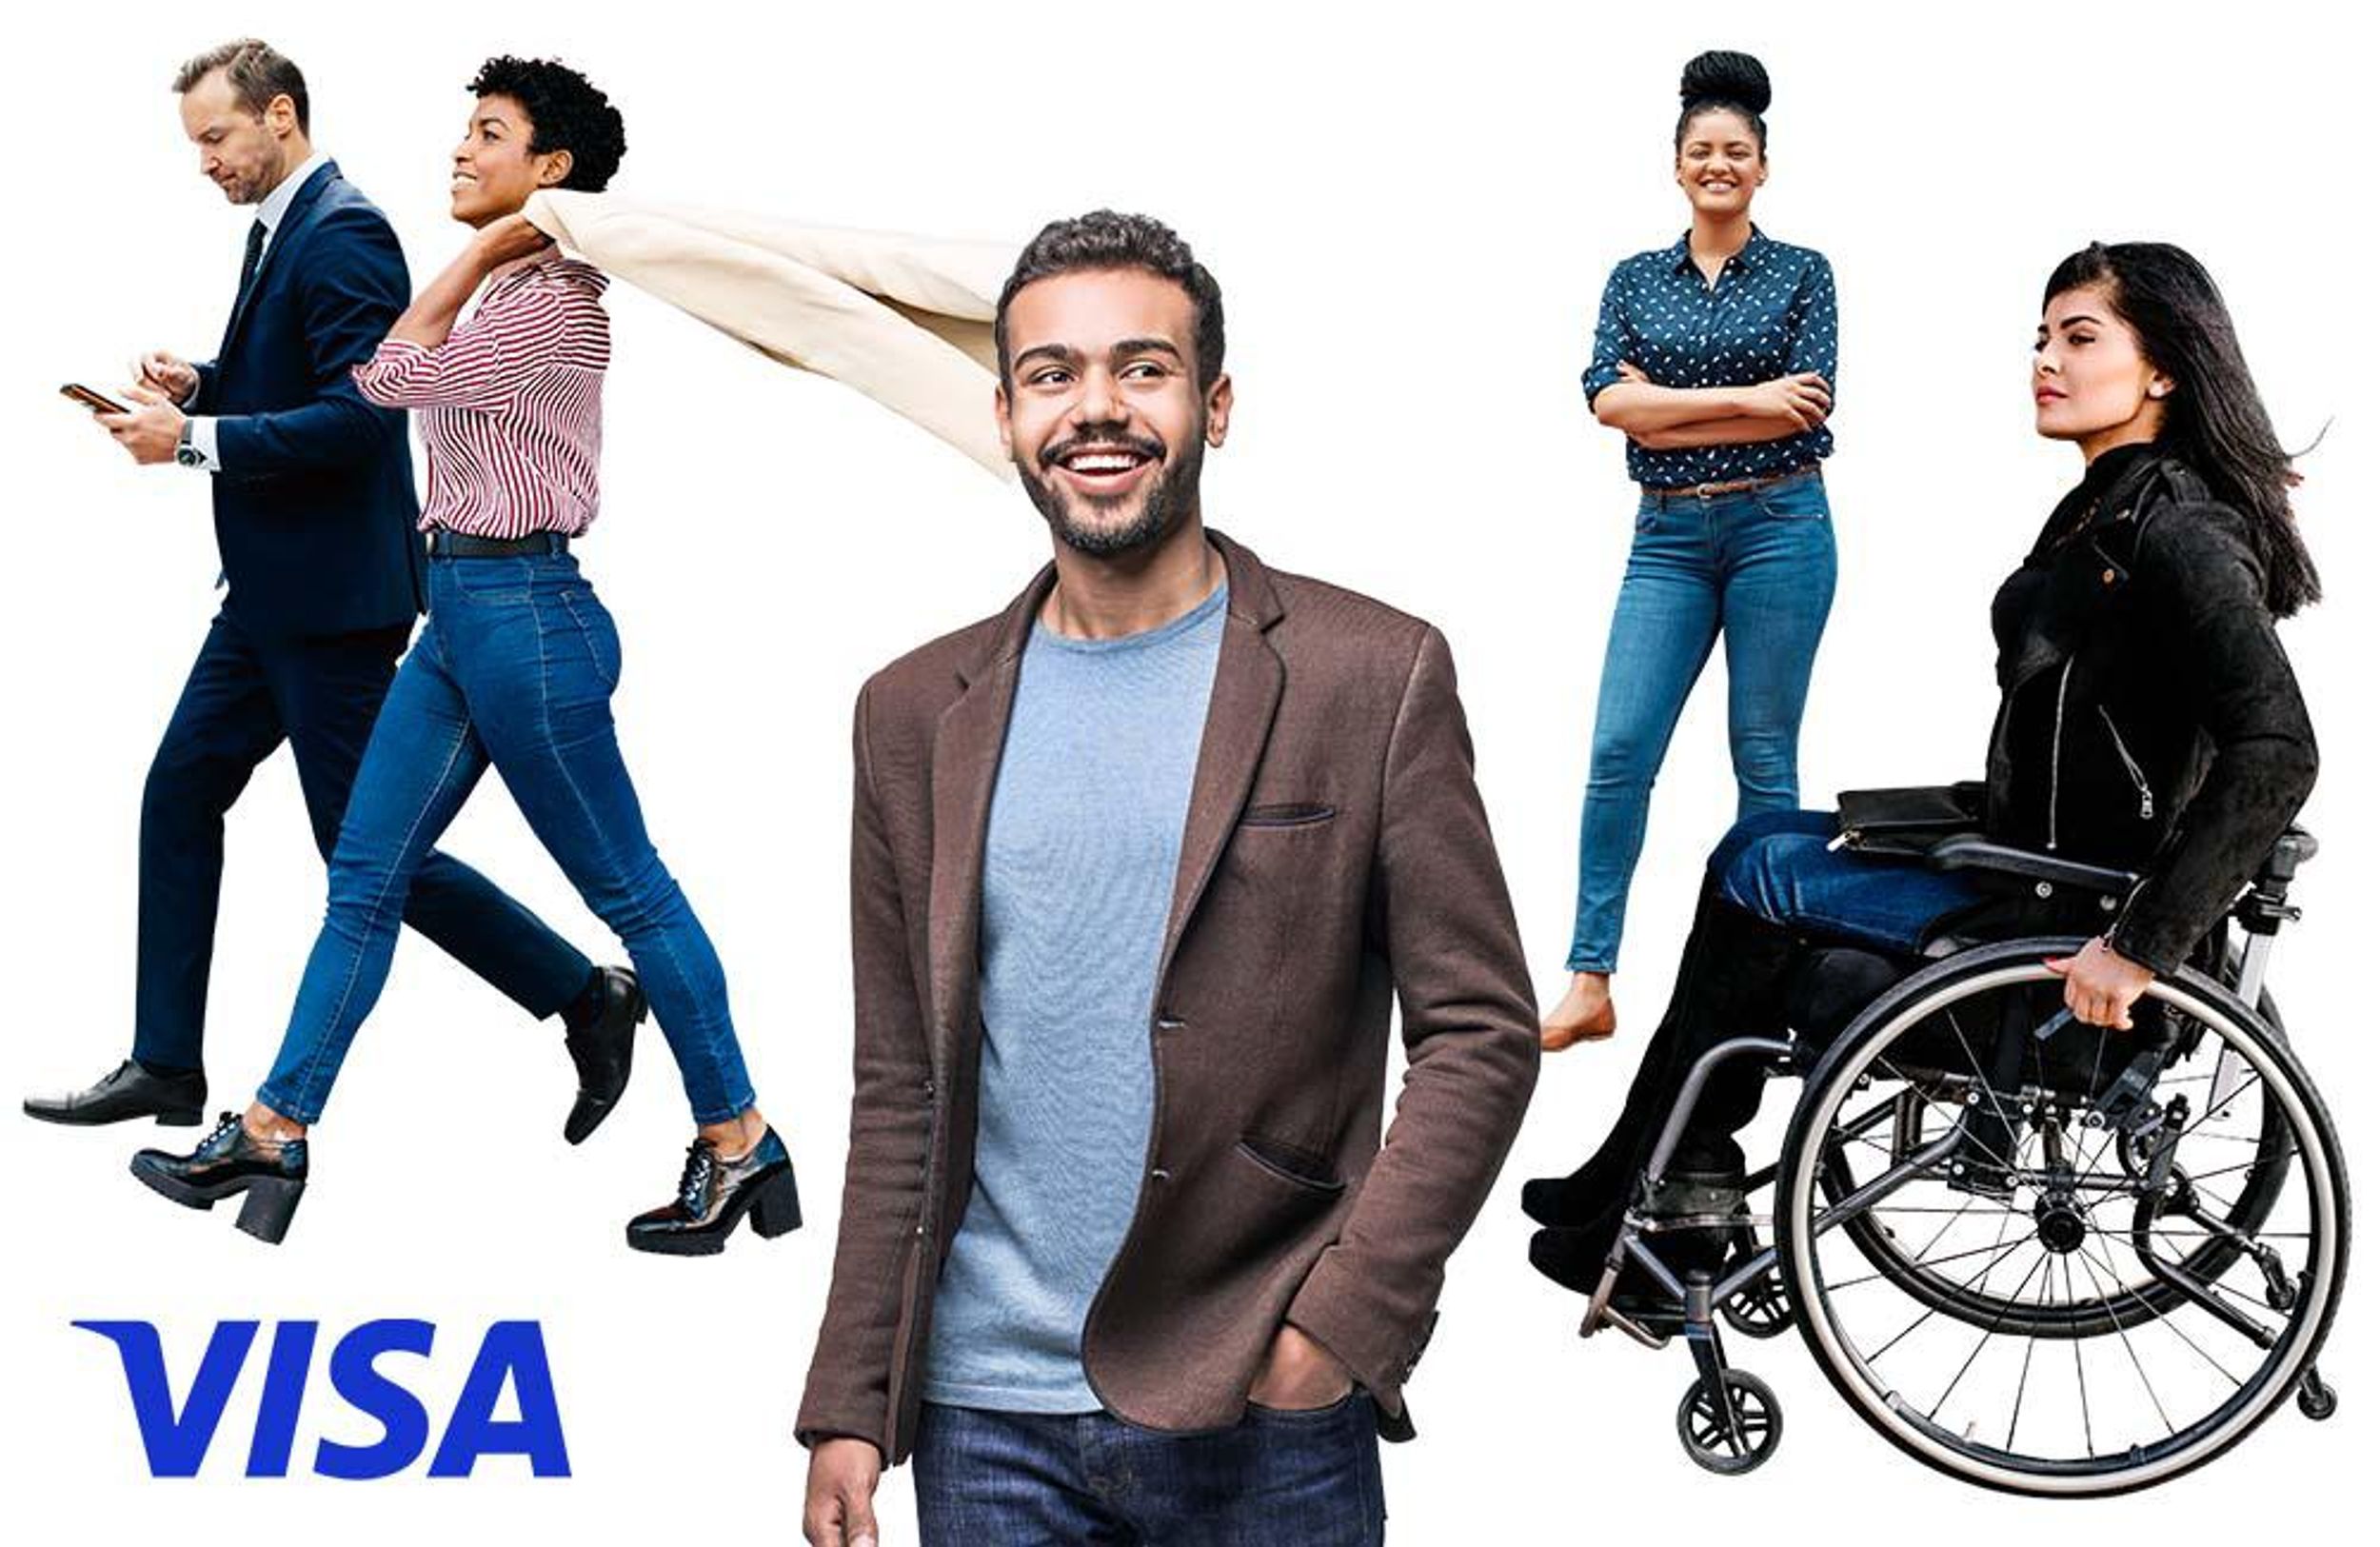 Visa: We believe in access for everyone. Image of a small, diverse group of people, smiling